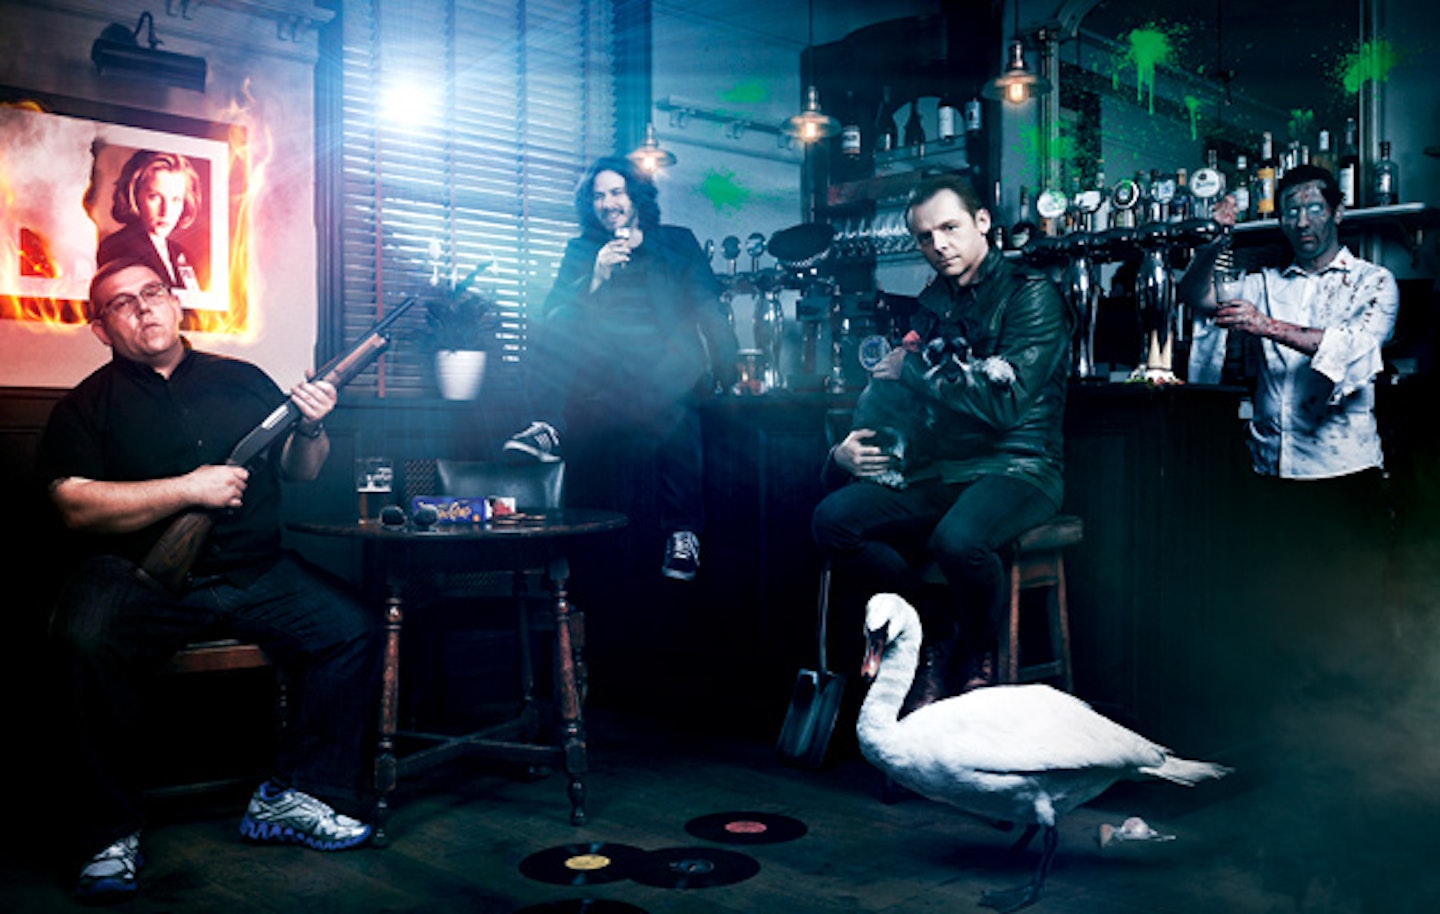 edgar wright simon pegg nick frost empire podcast the world's end